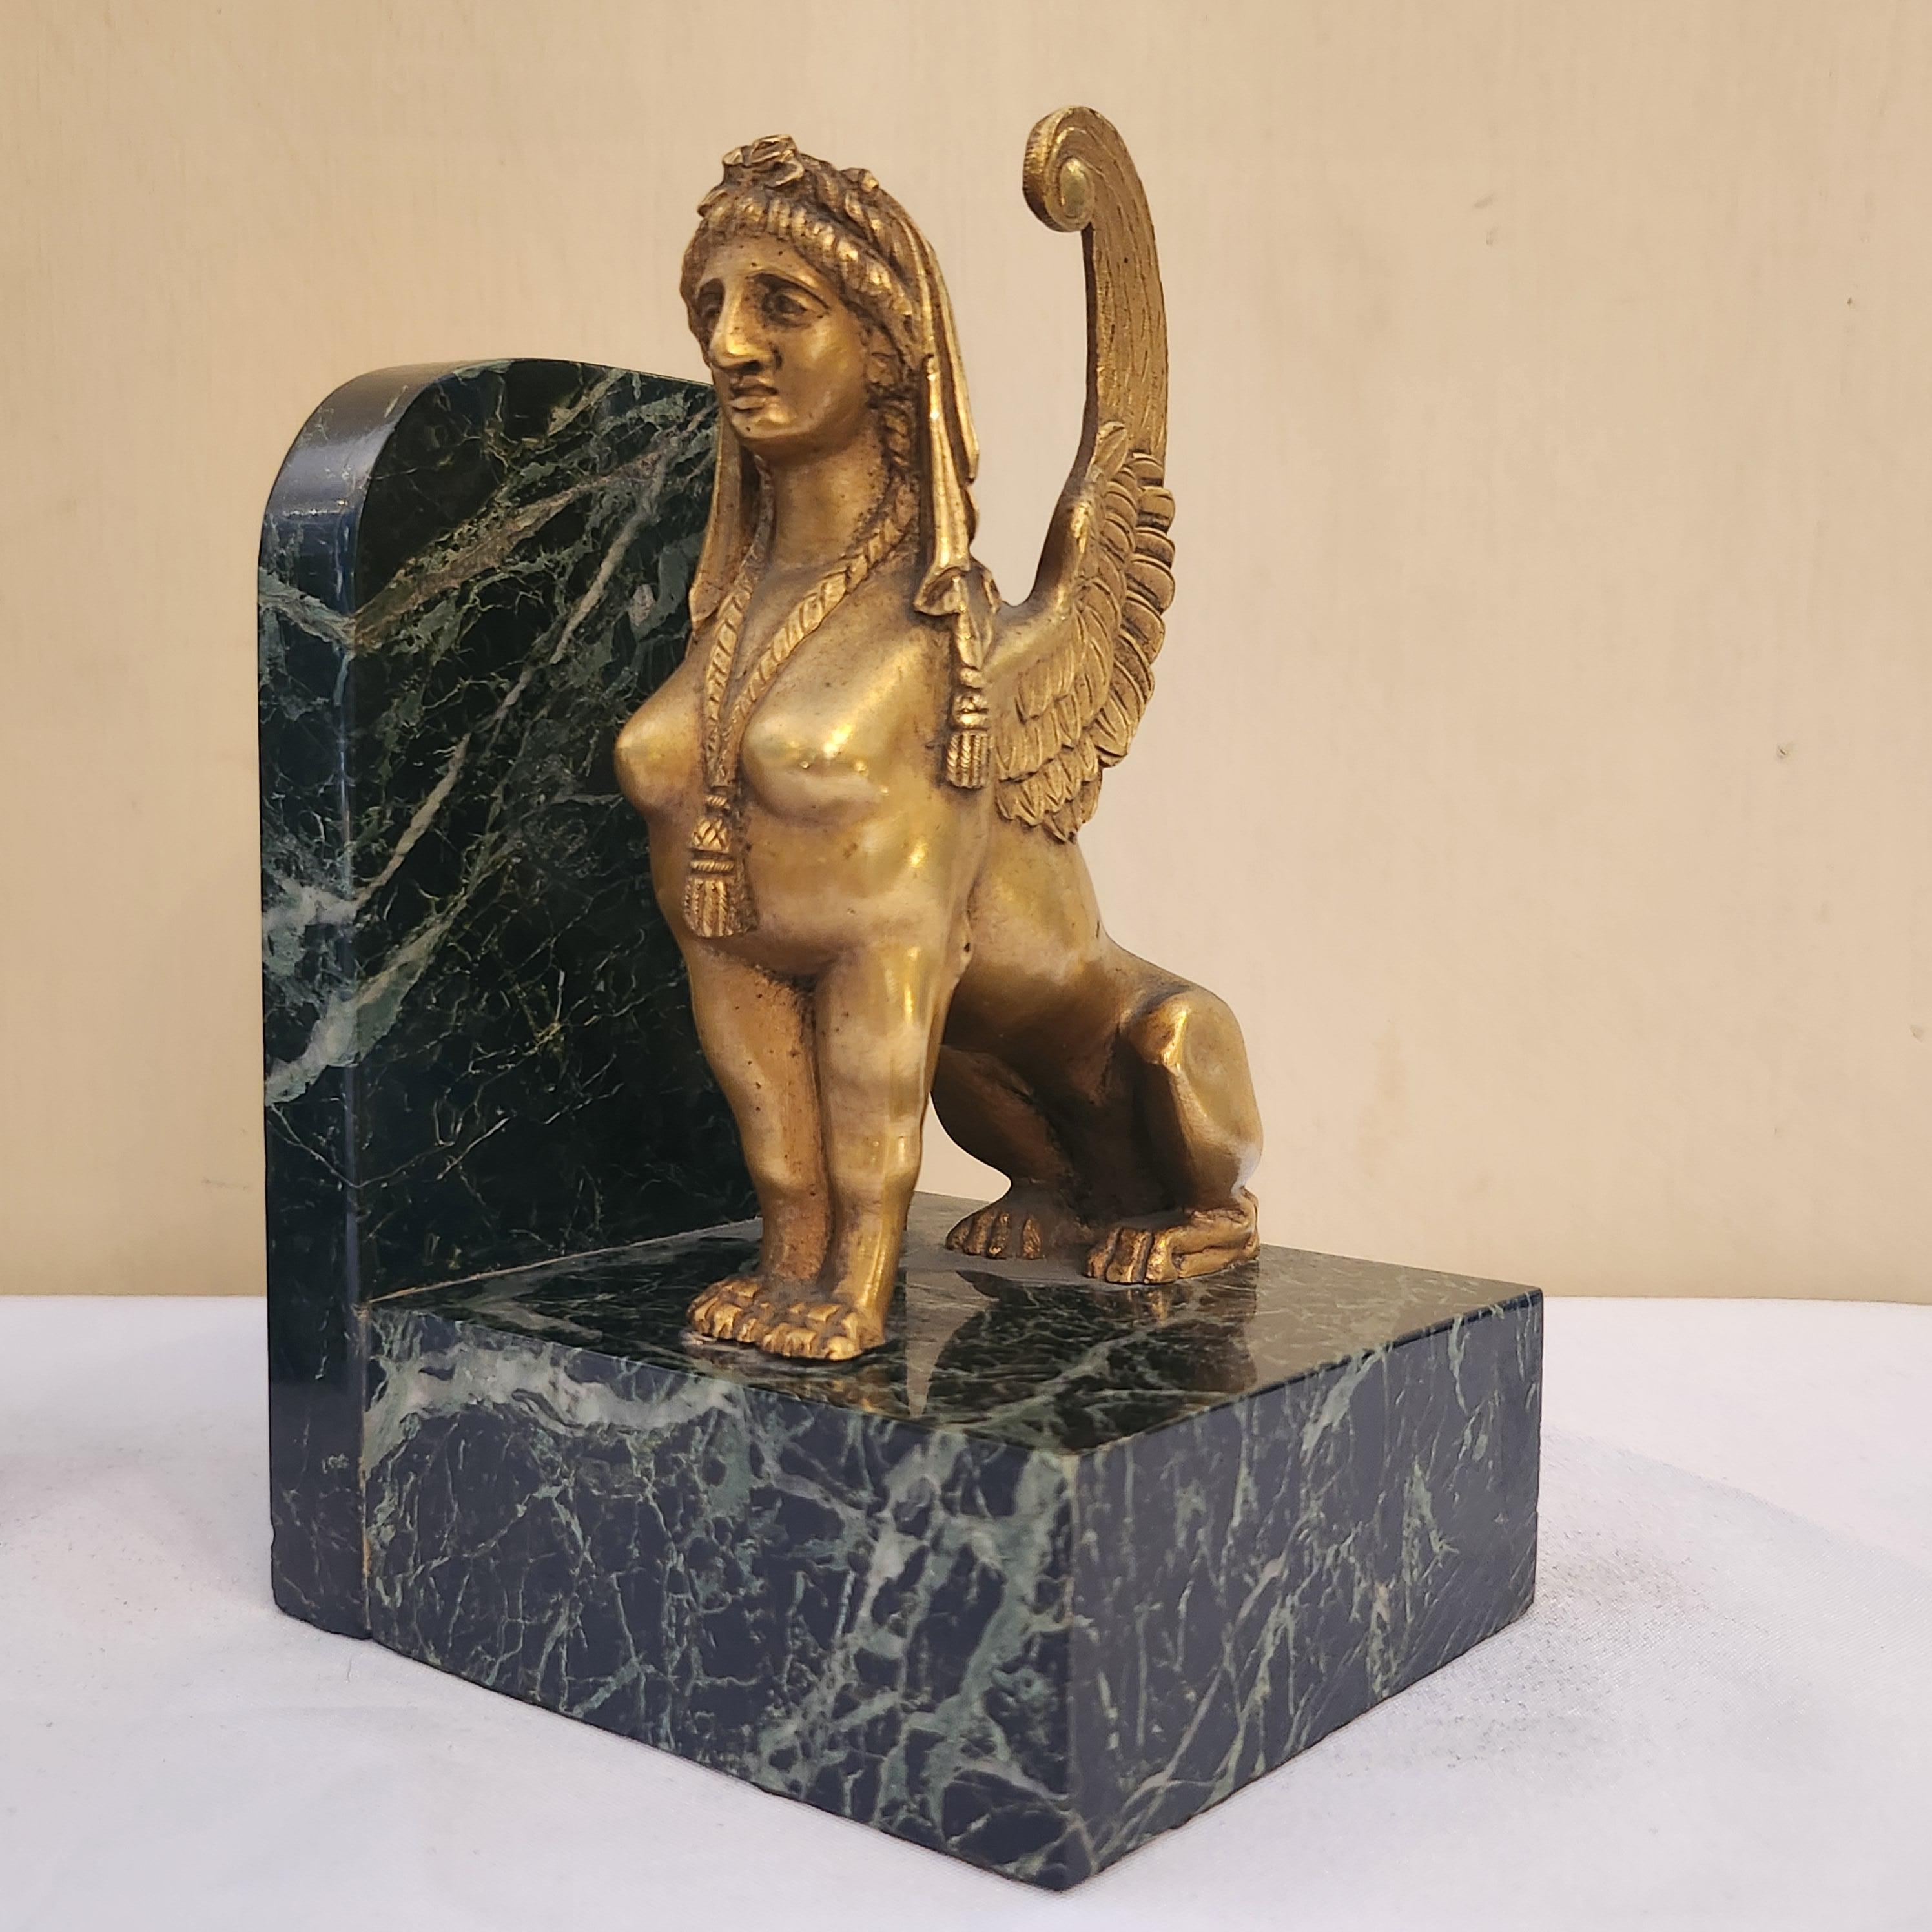 These art deco bronze gilt and marble base sphinxes bookends are a stunning example of the elegance and sophistication of the art deco era. Crafted with meticulous attention to detail, these bookends feature majestic sphinxes, mythical creatures